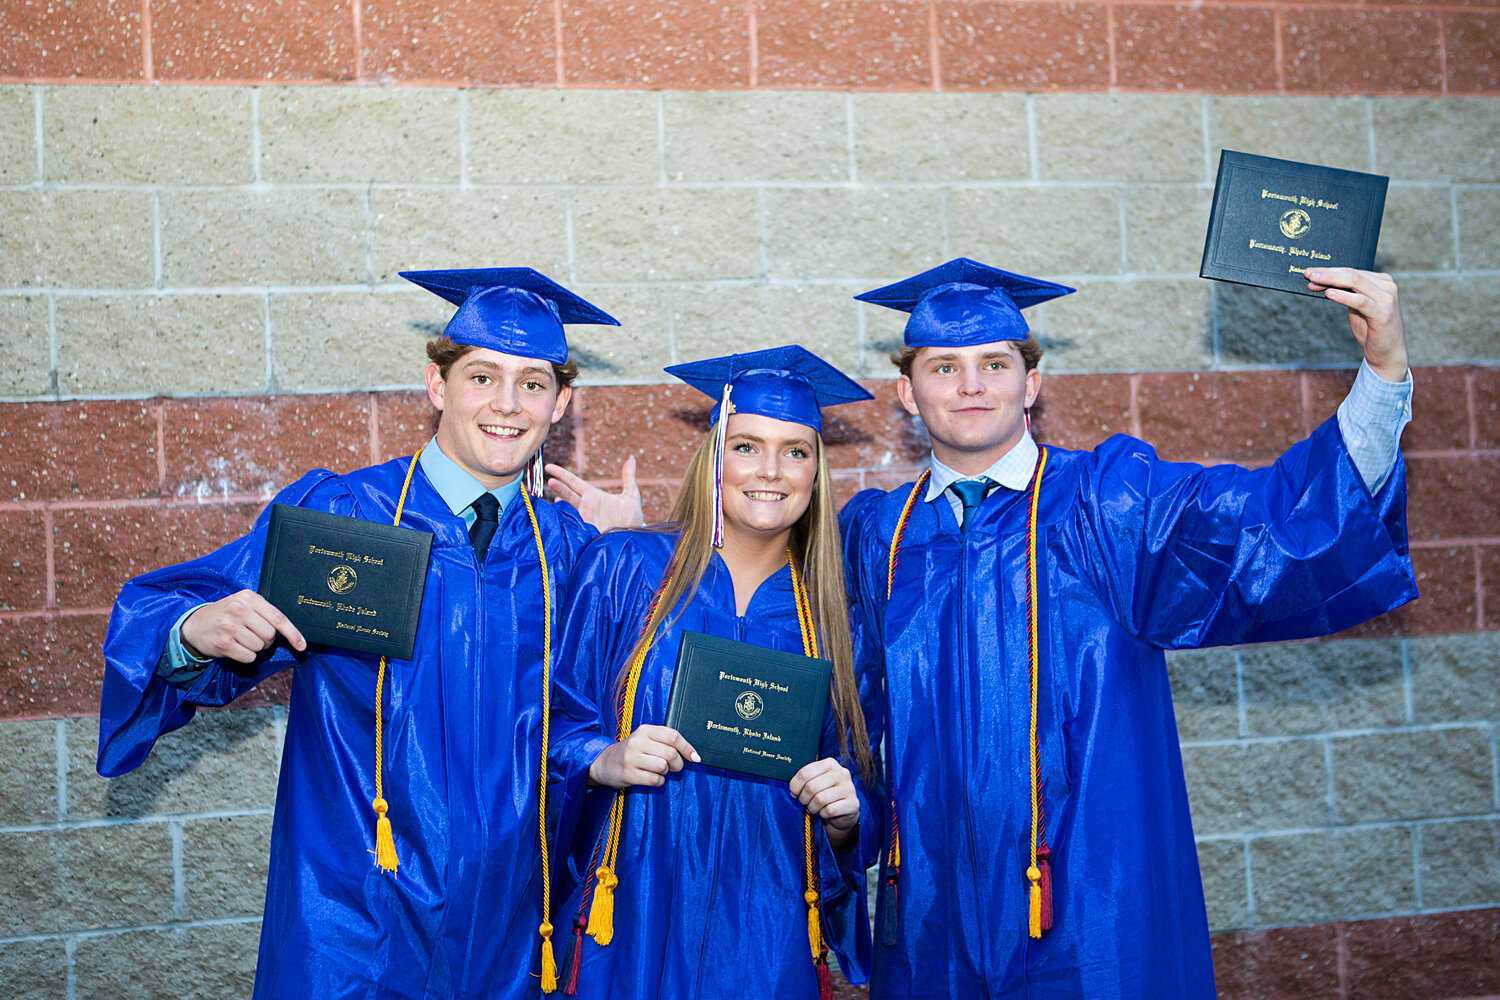 The Tullson triplets from Little Compton — Evan, Maeve, and Neal (from left) — show off their diplomas after graduating from Portsmouth High School Friday night.